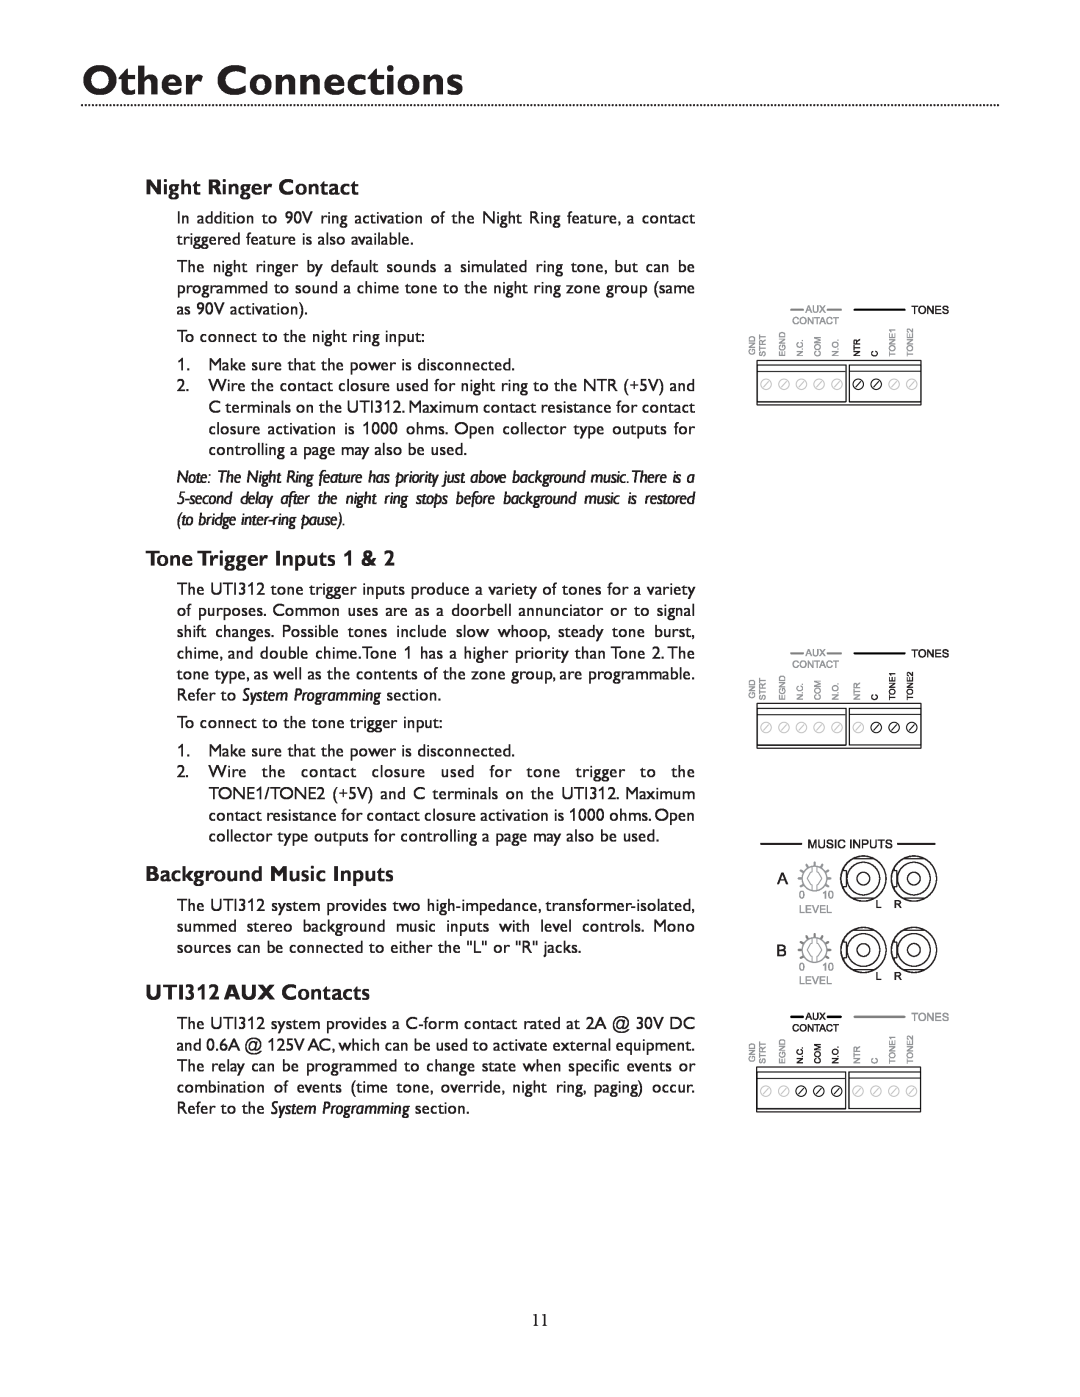 Bogen Other Connections, Night Ringer Contact, Tone Trigger Inputs 1, Background Music Inputs, UTI312 AUX Contacts 